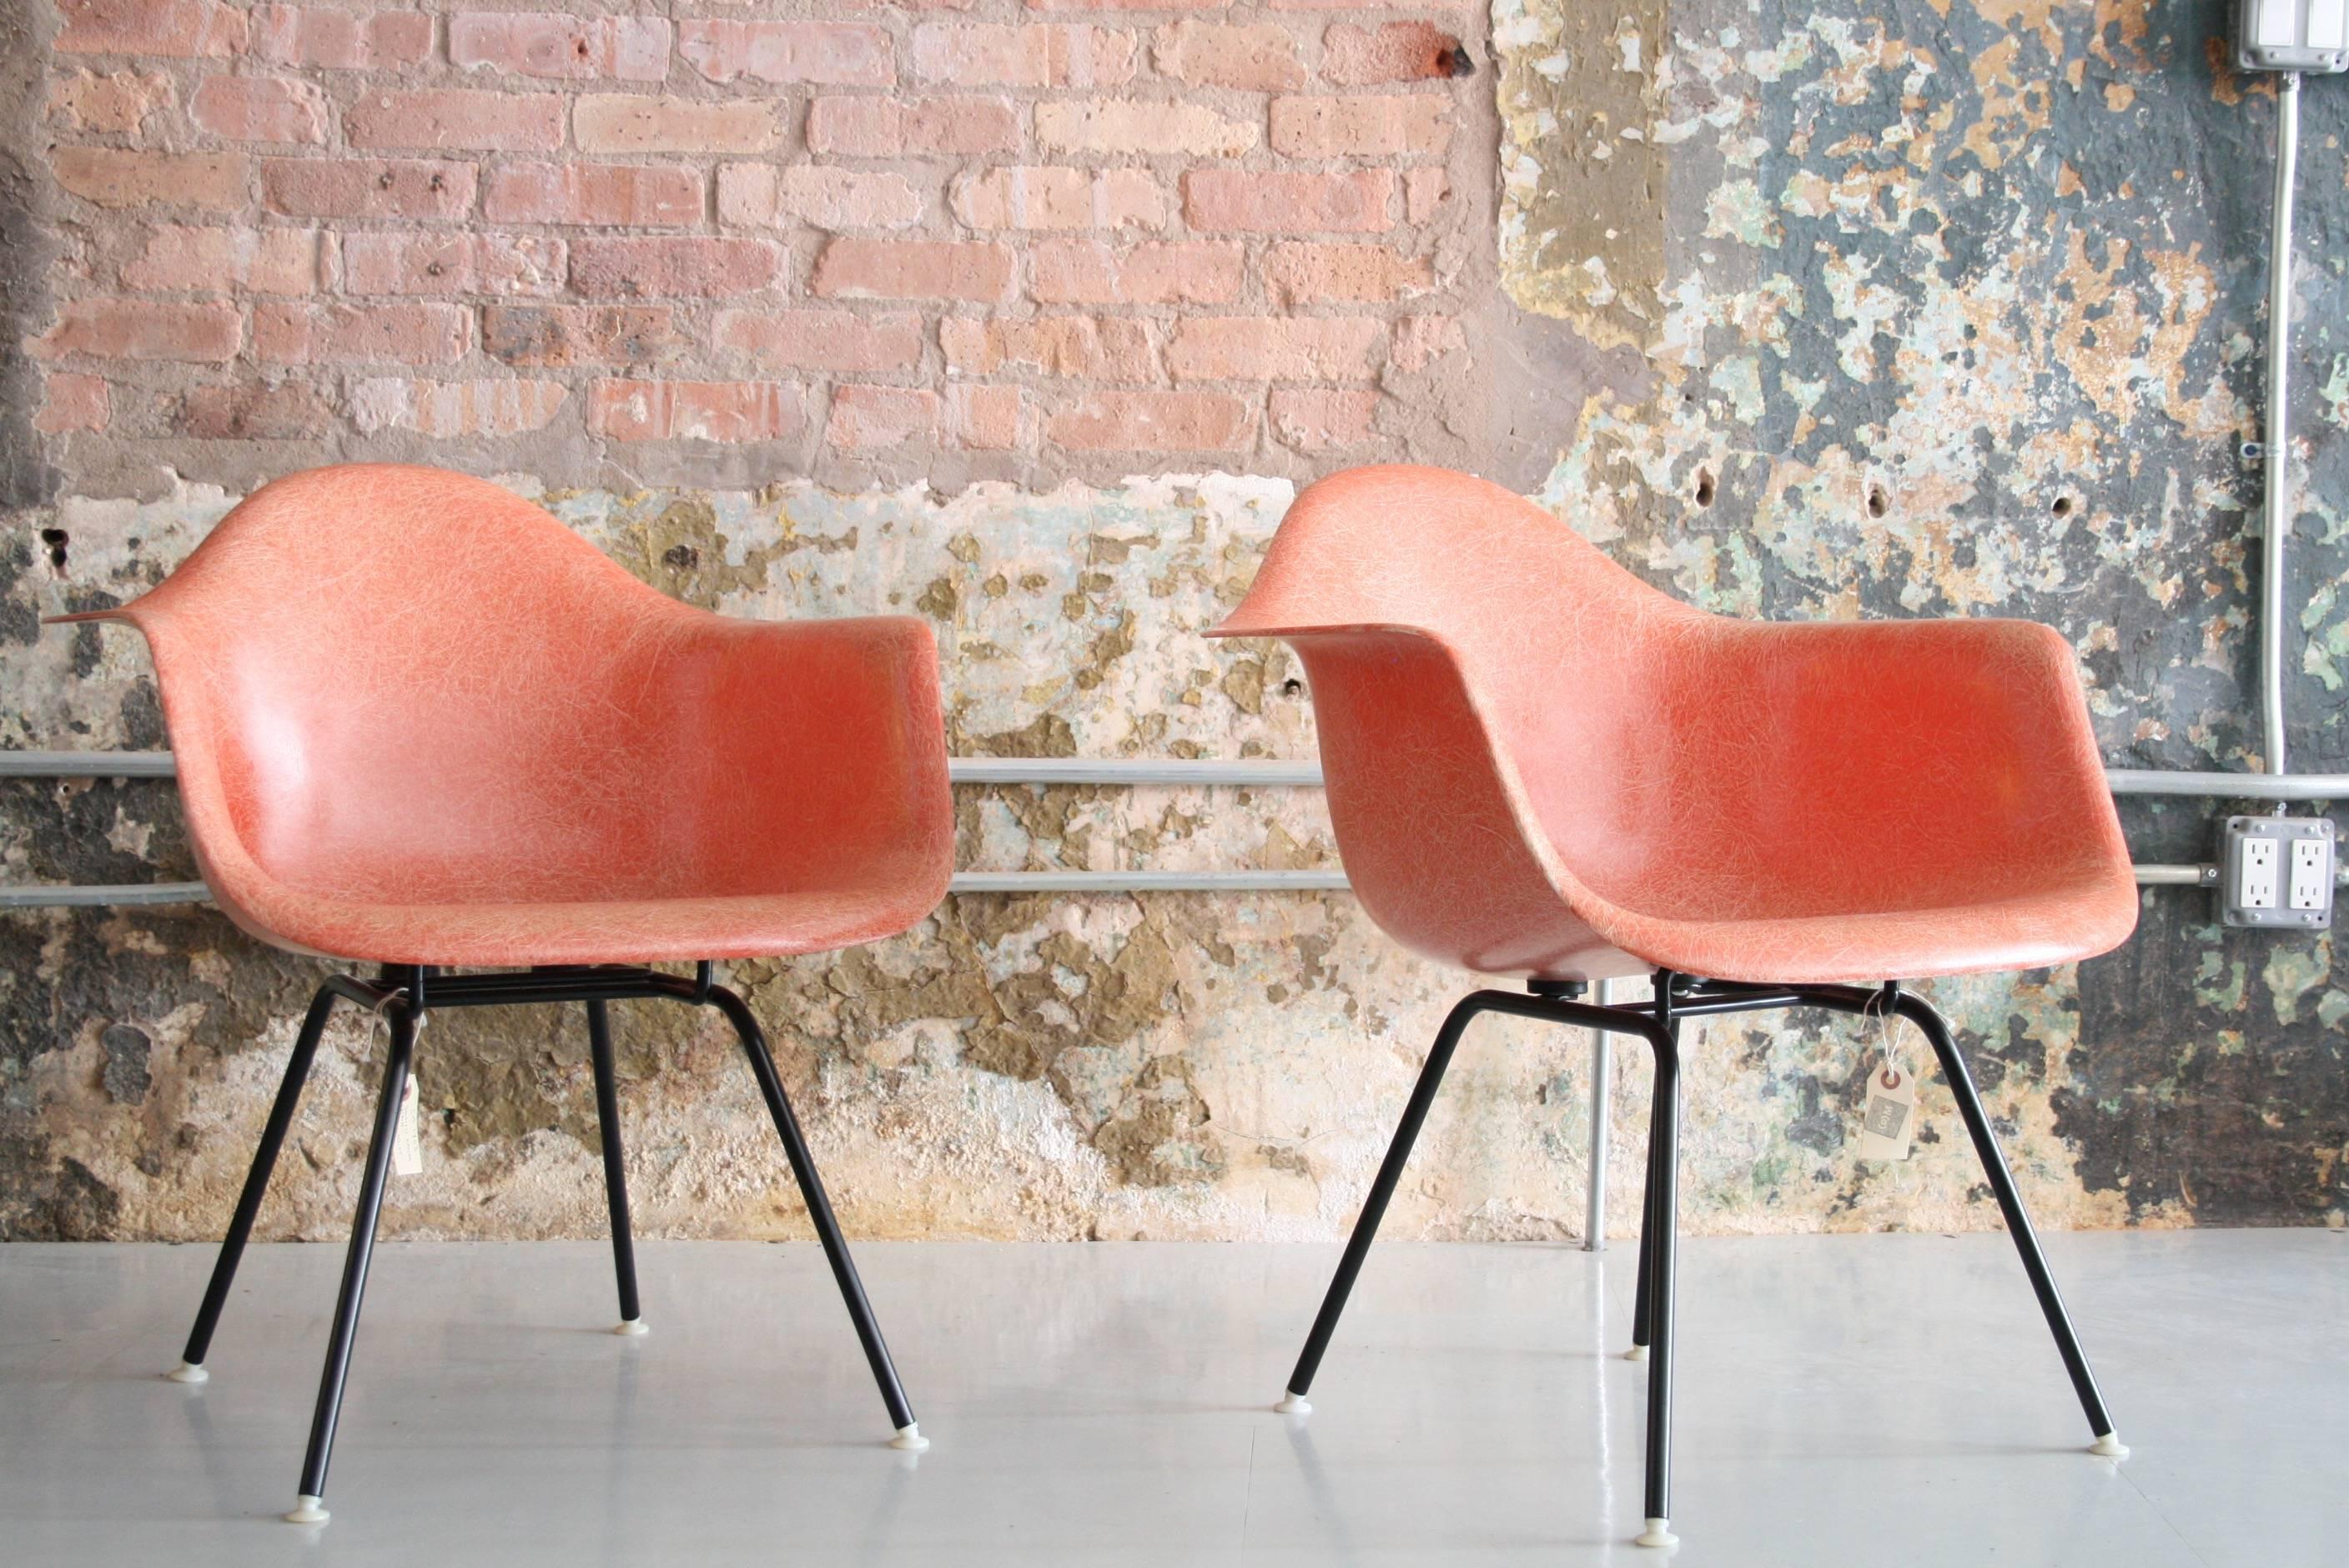 Iconic pair of Early Eames fiberglass bucket chairs in salmon for Herman Miller. In amazing condition.